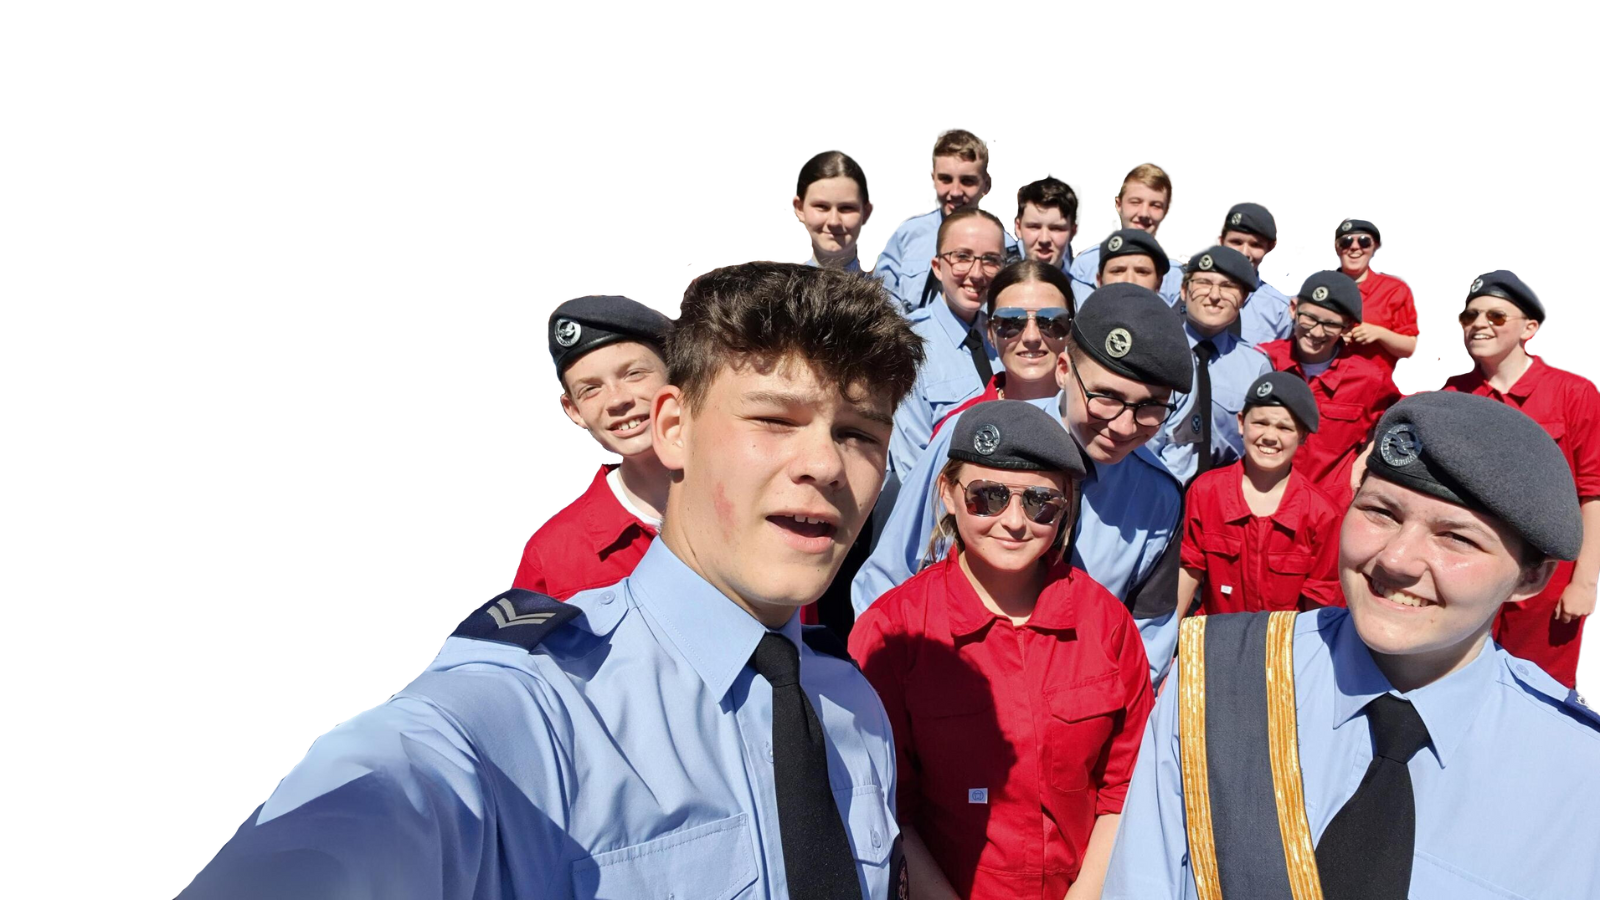 Group of cadets smiling